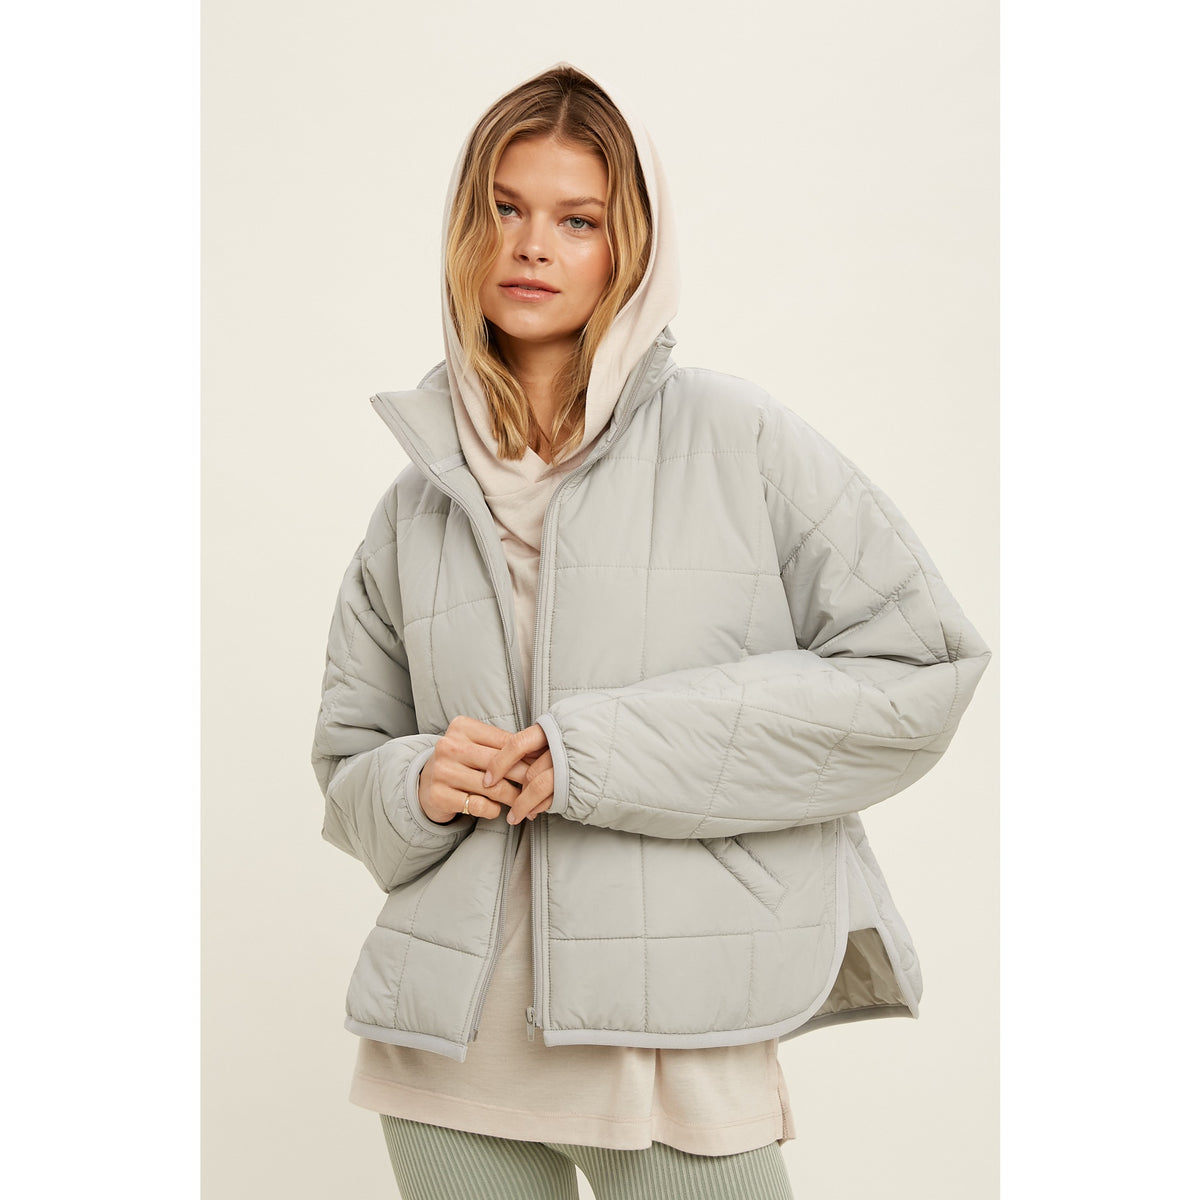 KEYSTONE PUFFER – The Boutique at Mira's